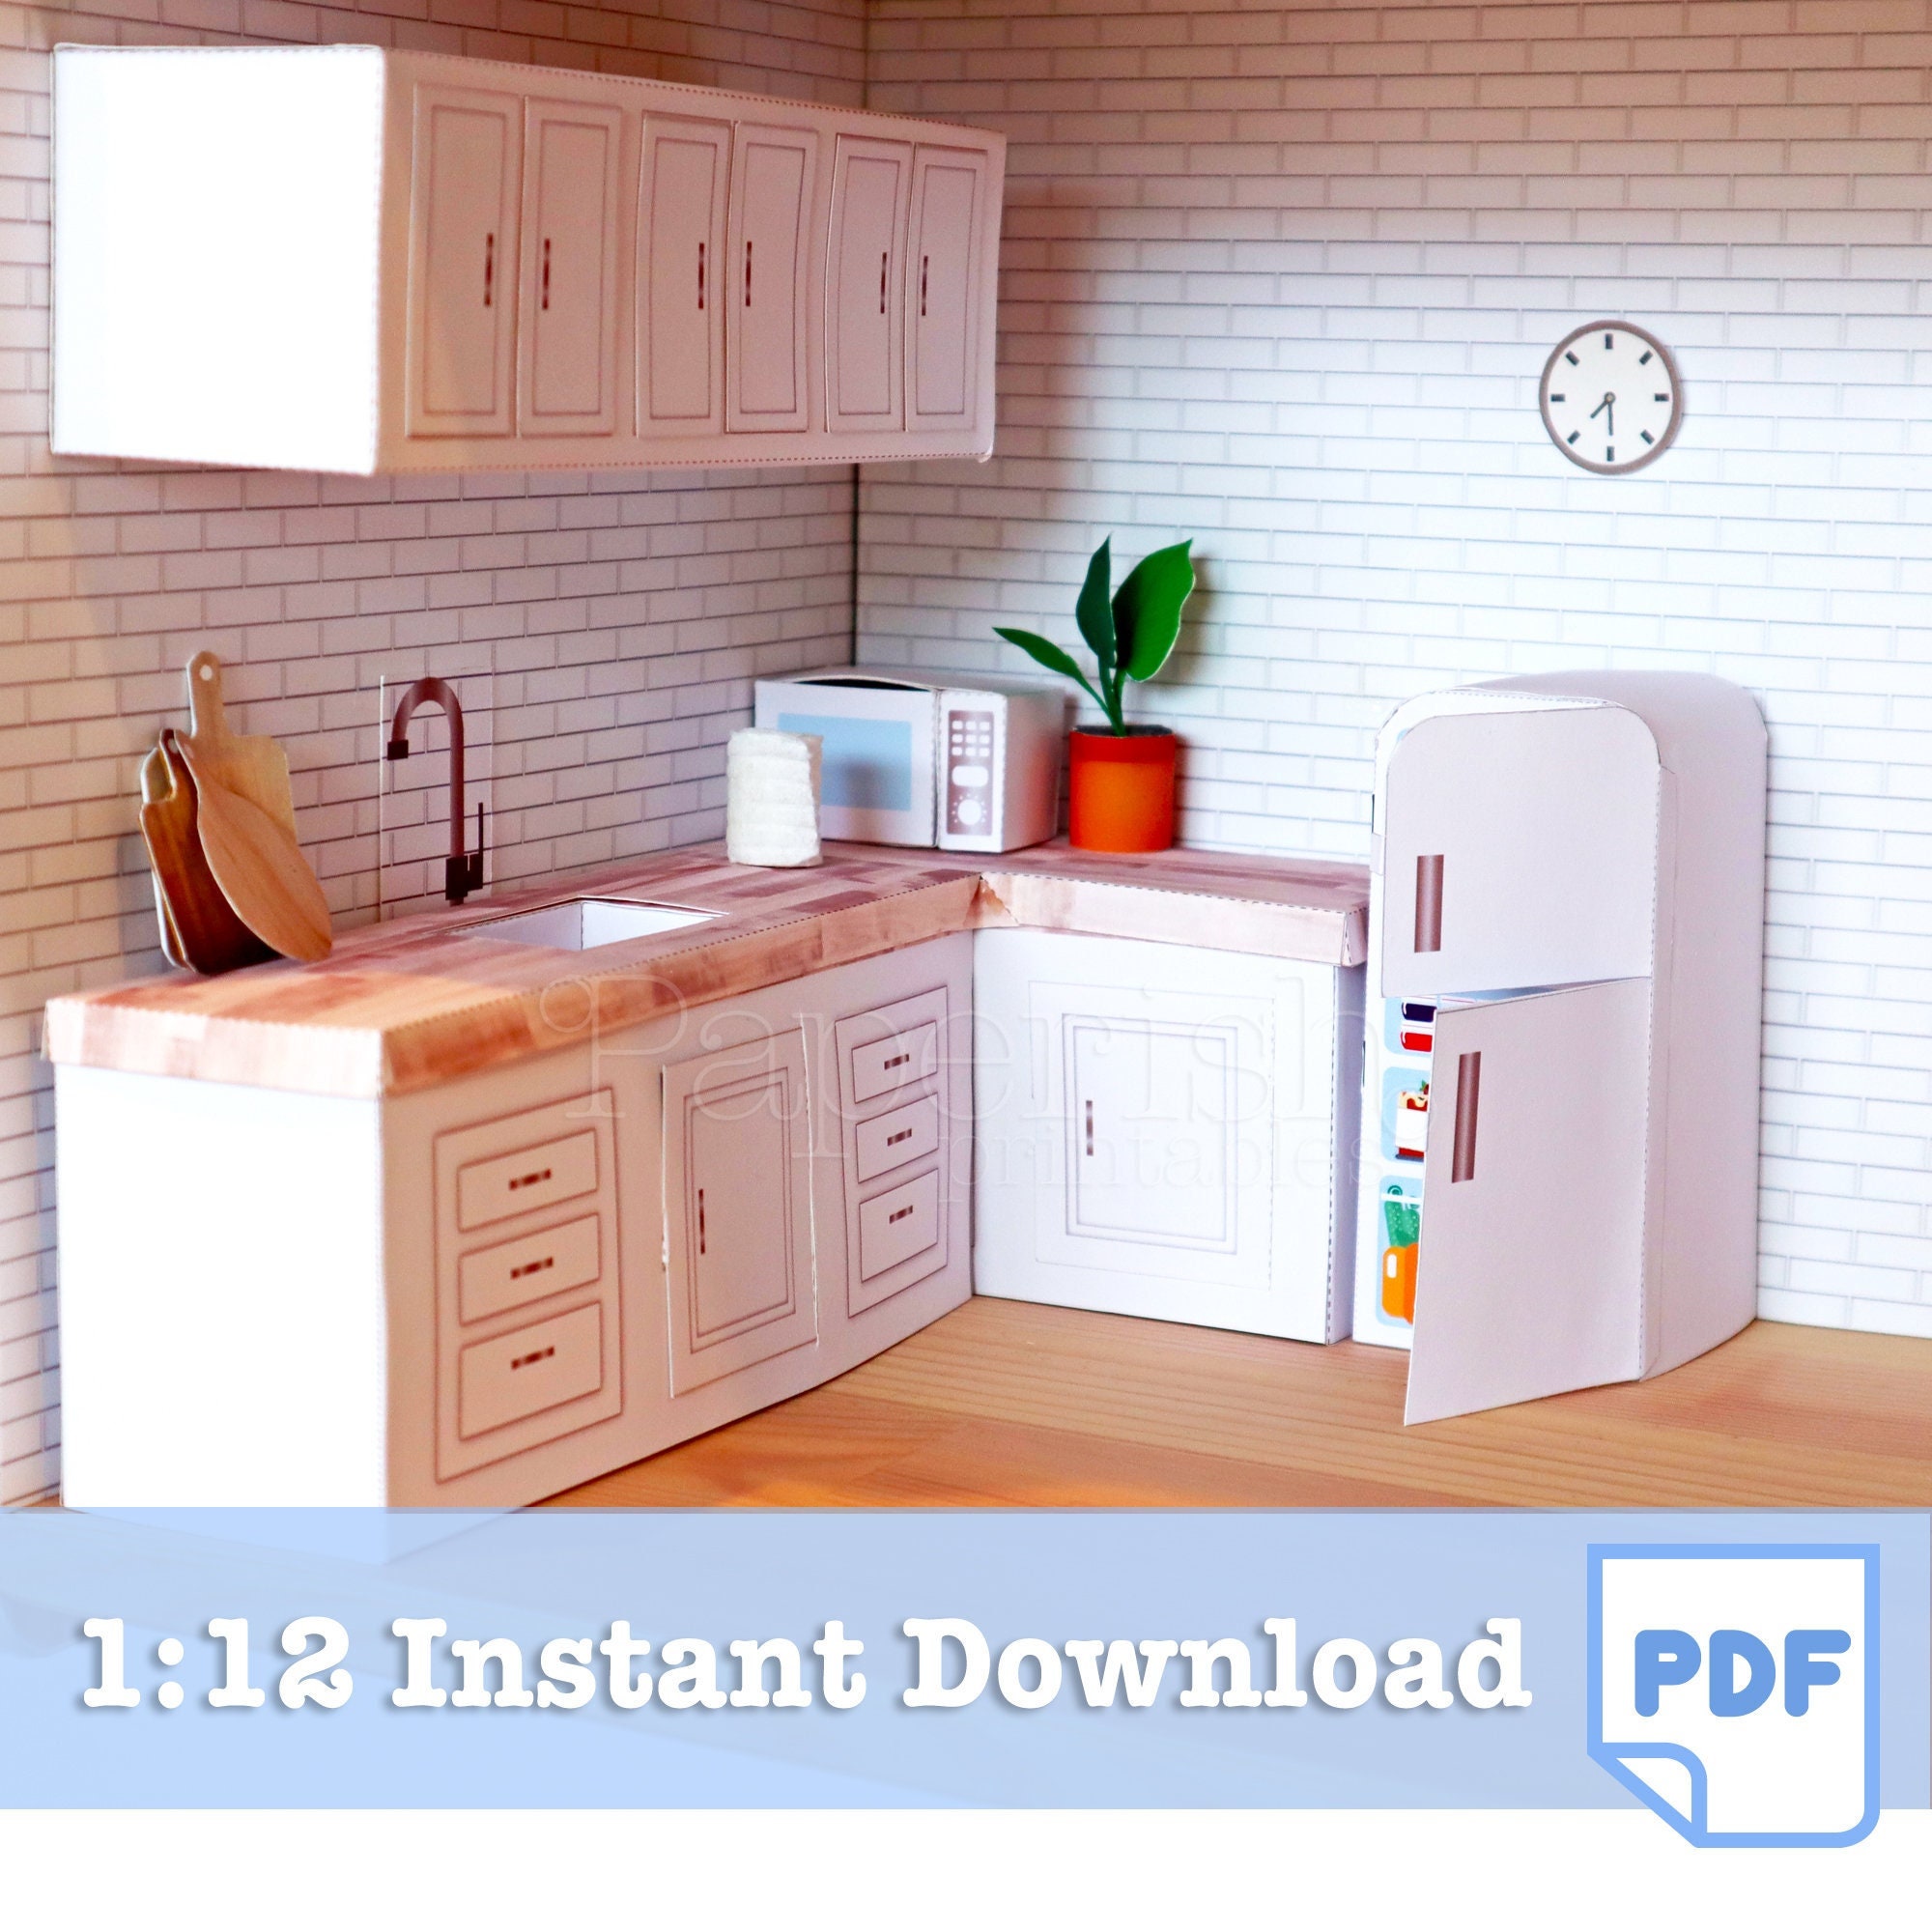 SVG Dollhouse Small Kitchen Microwave / Dollhouse DIY Mini Microwave Oven  Cricut Cut File Instant Download -  Norway